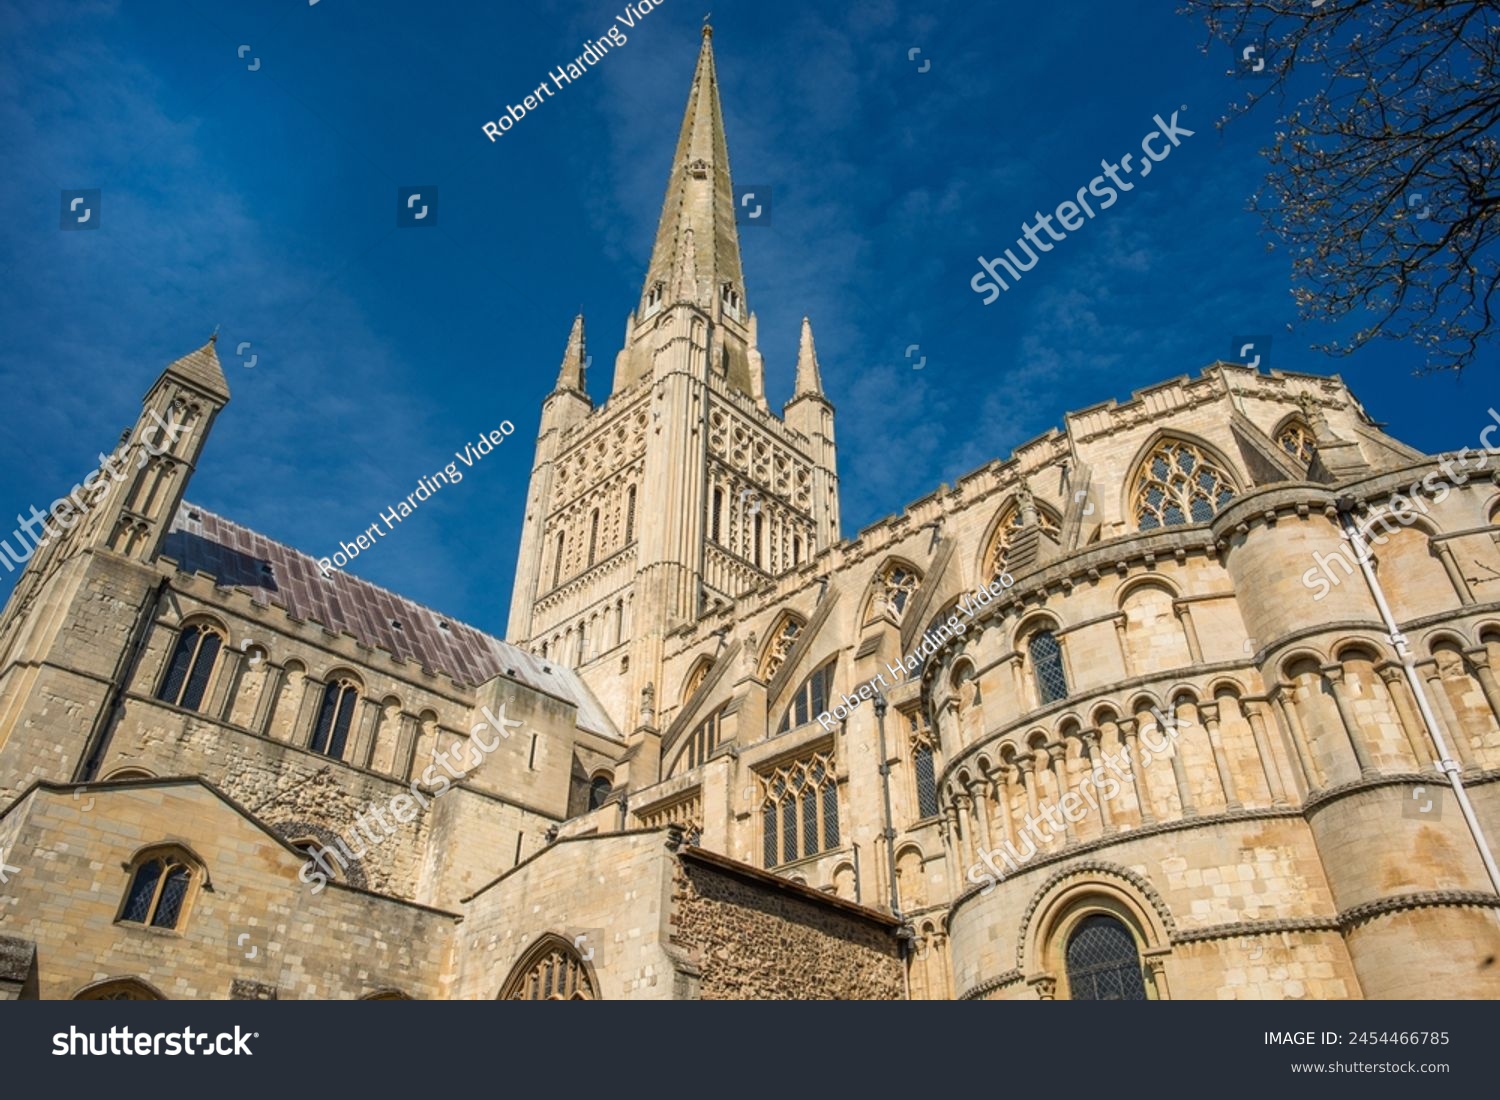 Norwich Cathedral, Norwich, Norfolk, East Anglia, England, United Kingdom, Europe #2454466785